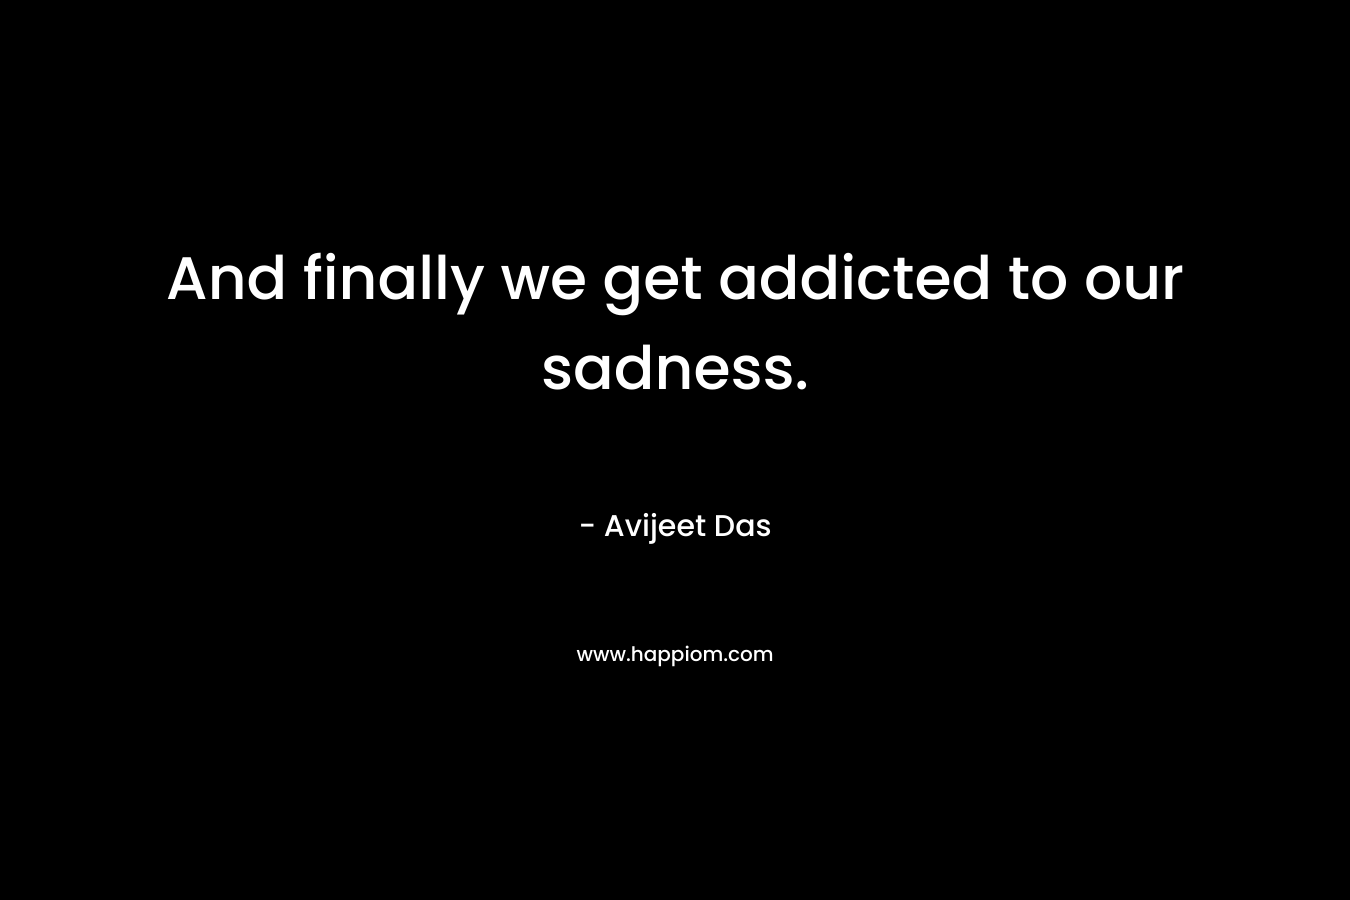 And finally we get addicted to our sadness.